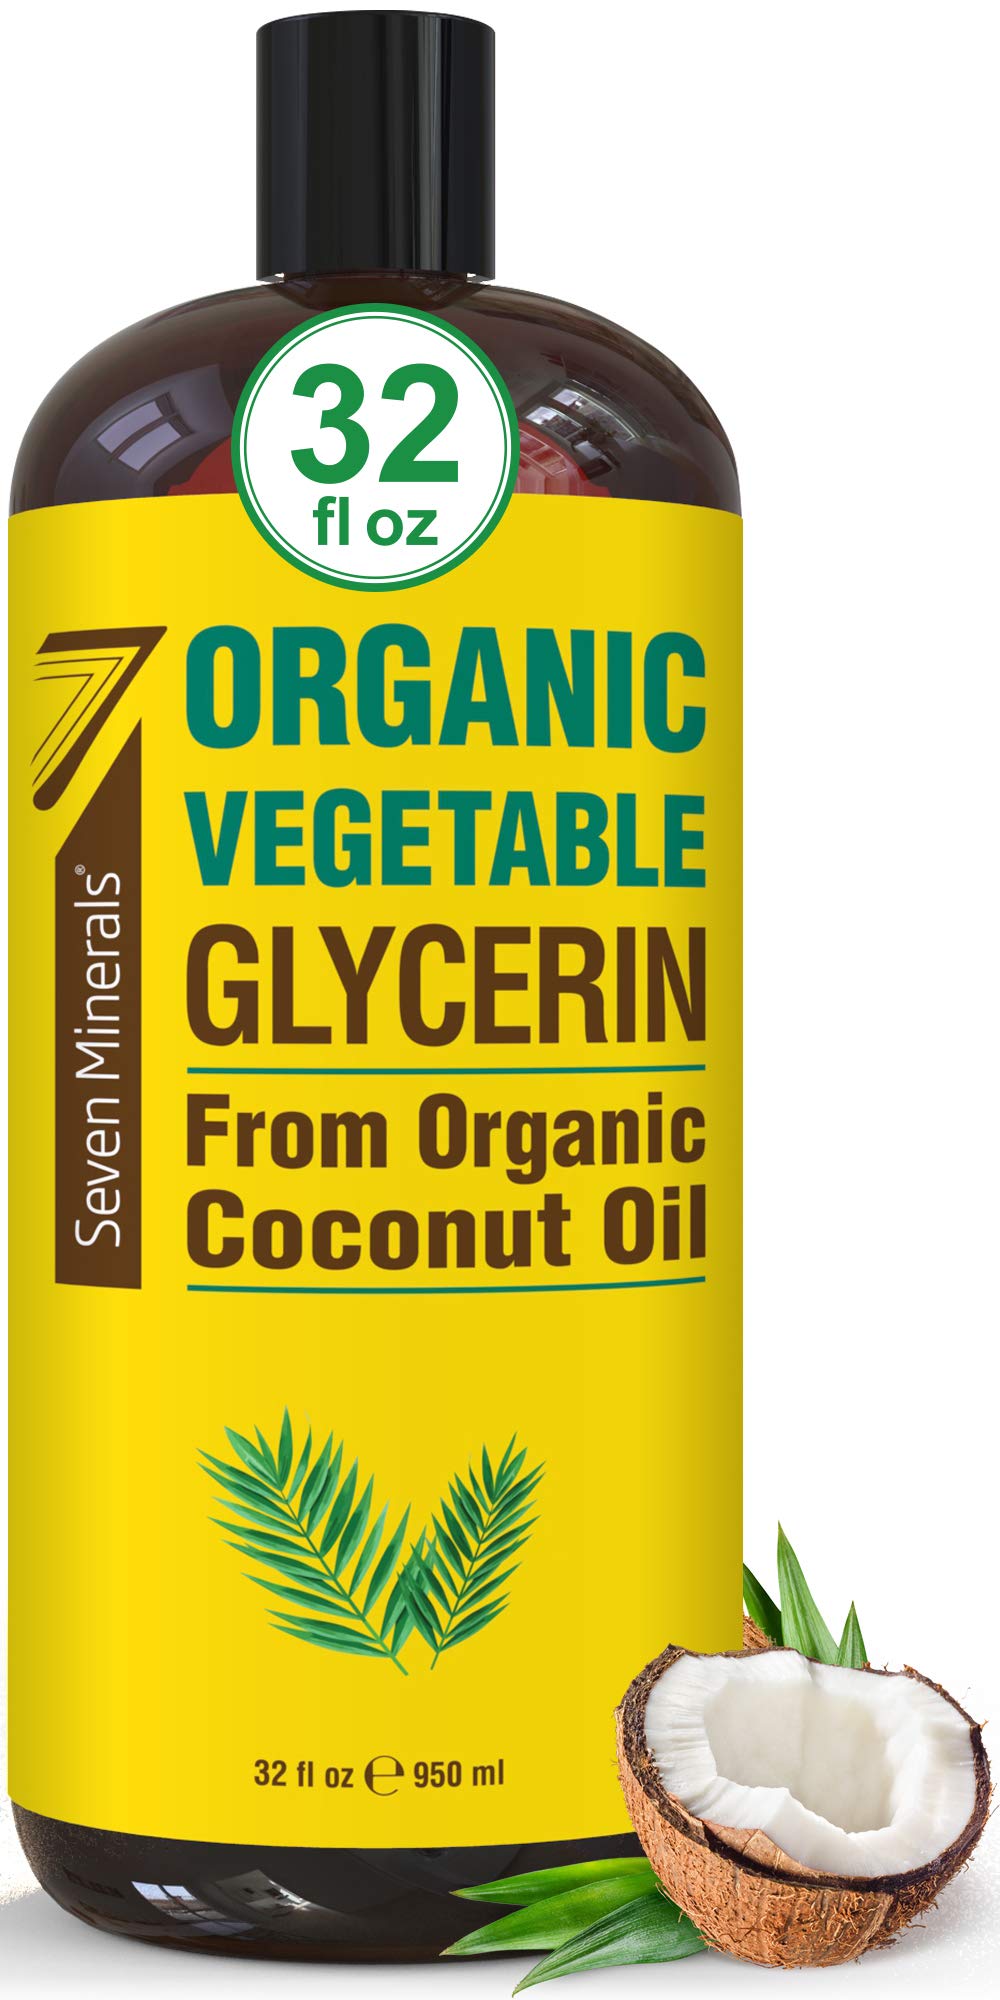 Organic Vegetable Glycerin - Big 32 fl oz Bottle - No Palm Oil, Made with  Organic Coconut Oil - Therapeutical Grade Glycerine Liquid for DIYs -  Perfect as Hair, Nails and Skin Moisturizer - Non-Gmo